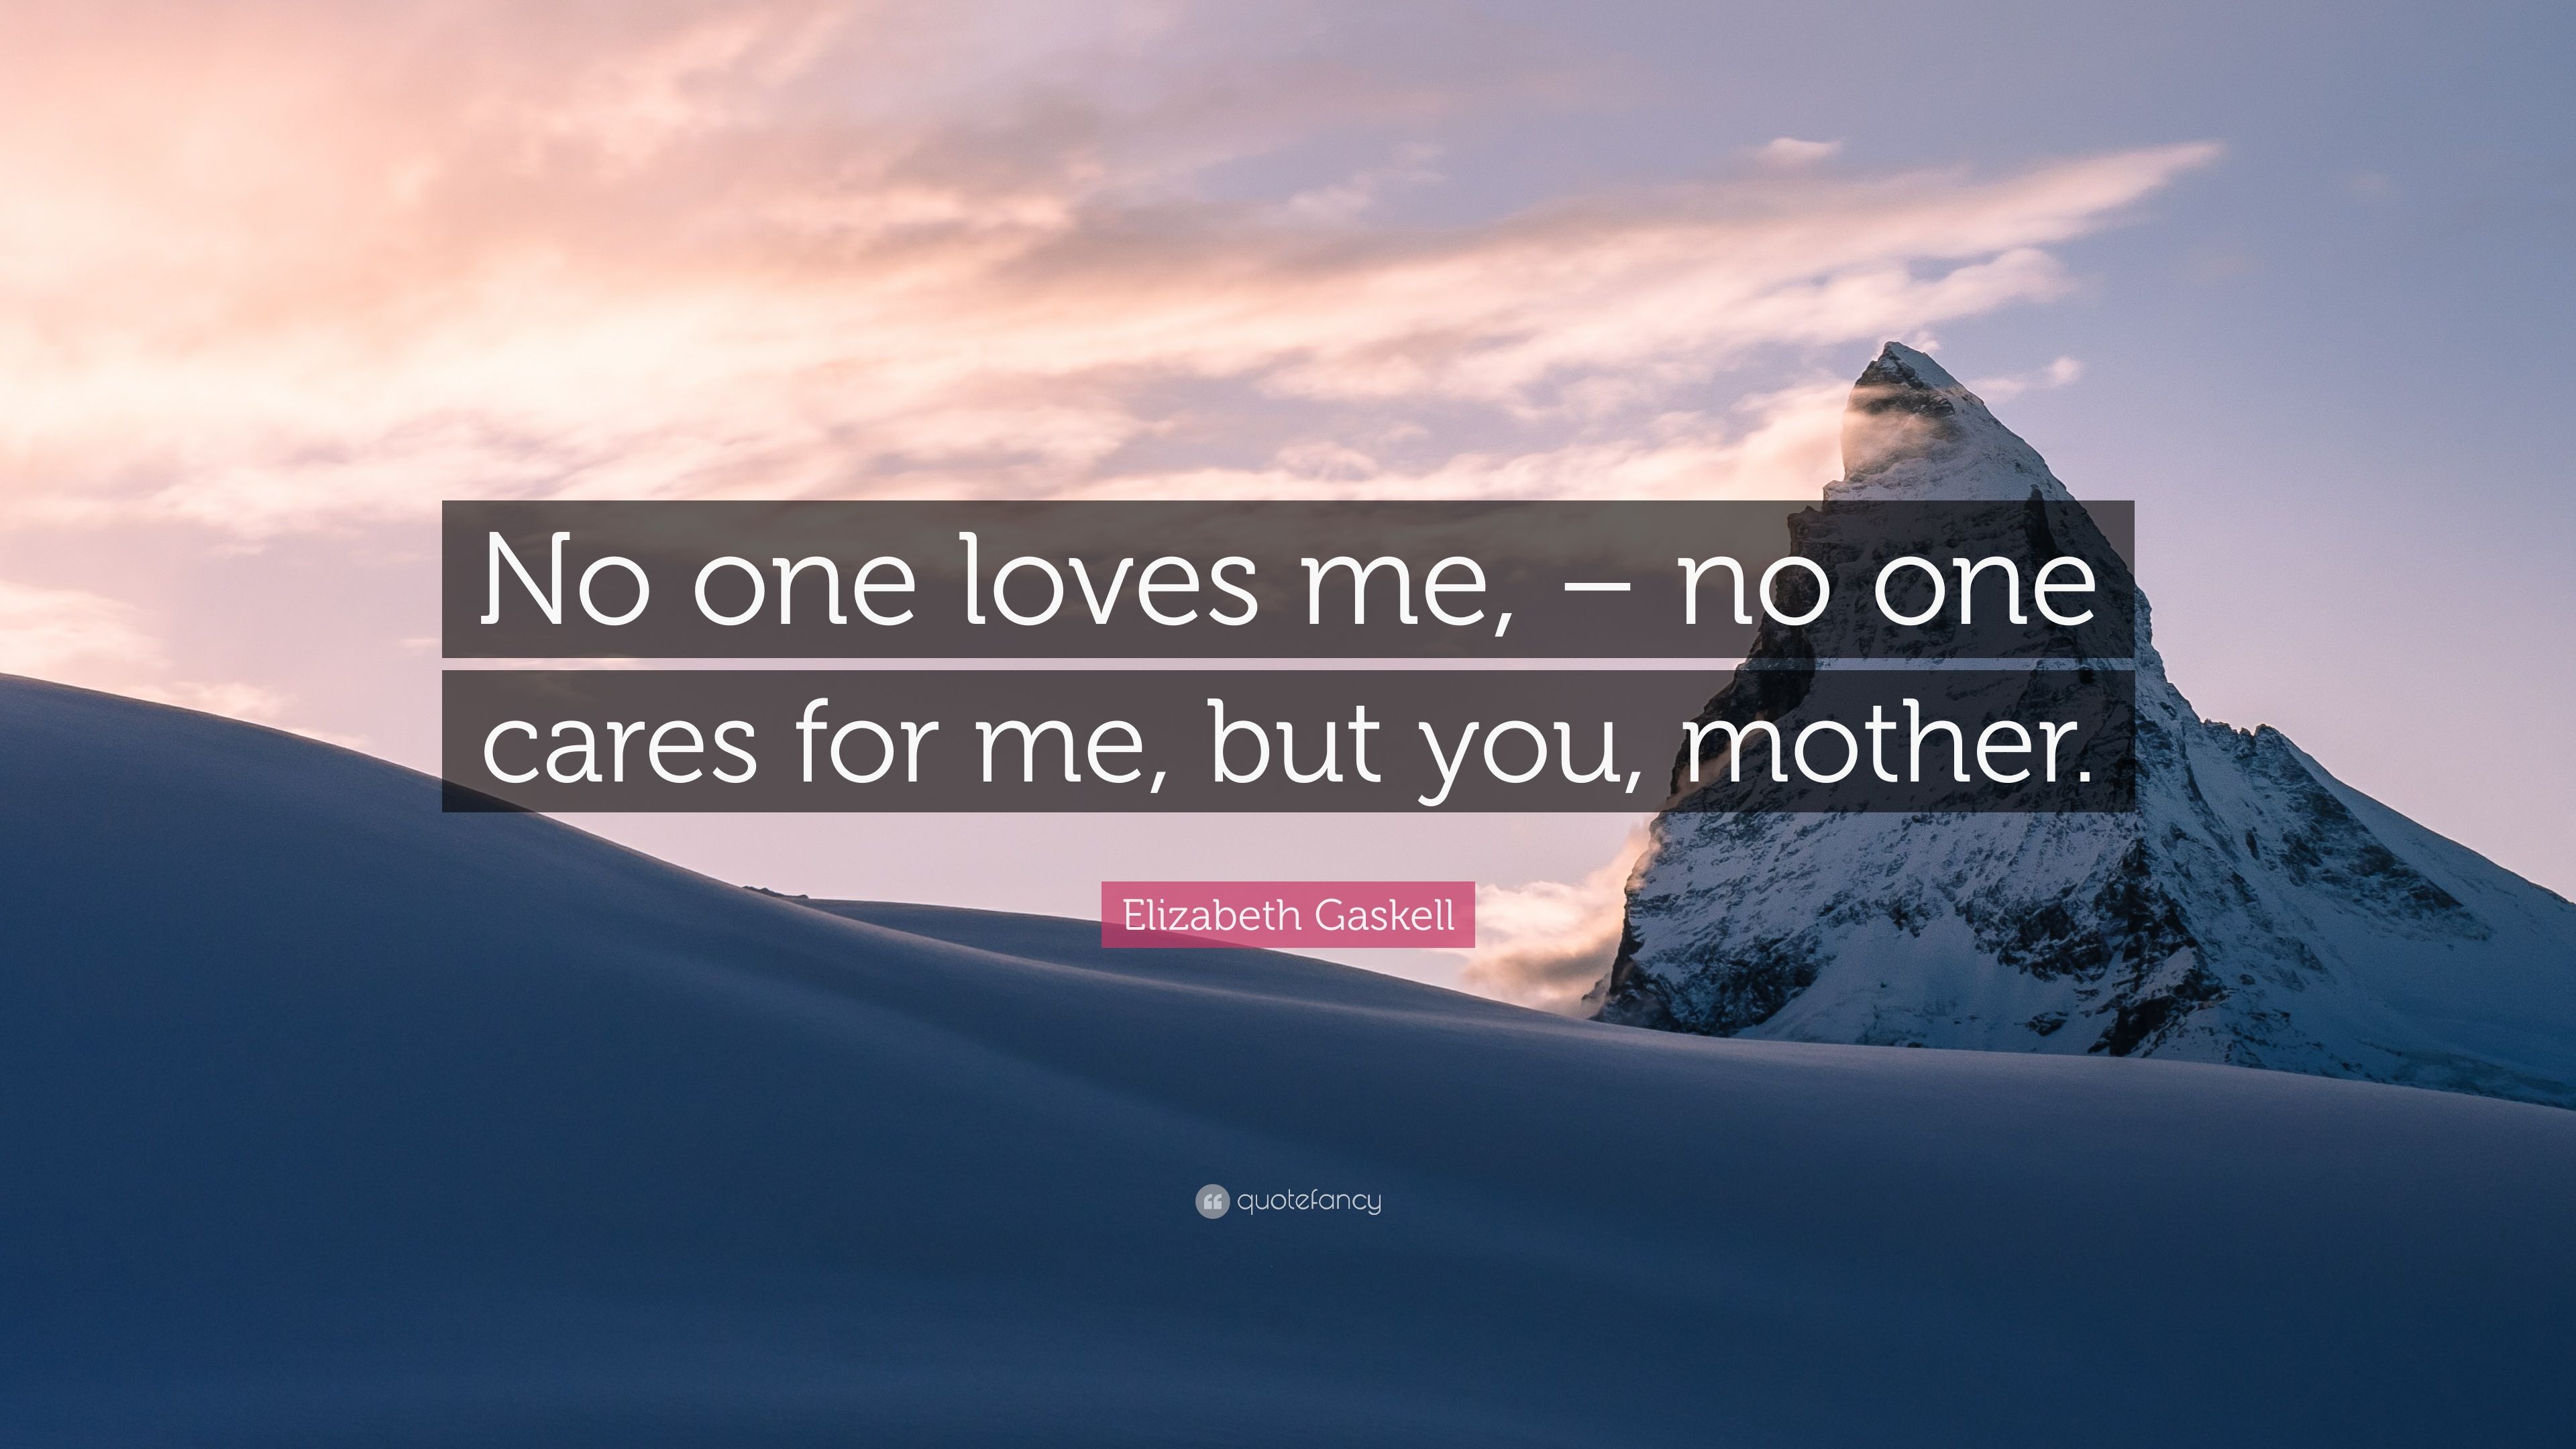 Elizabeth Gaskell Quote: "No one loves me, - no one cares for me, but you...